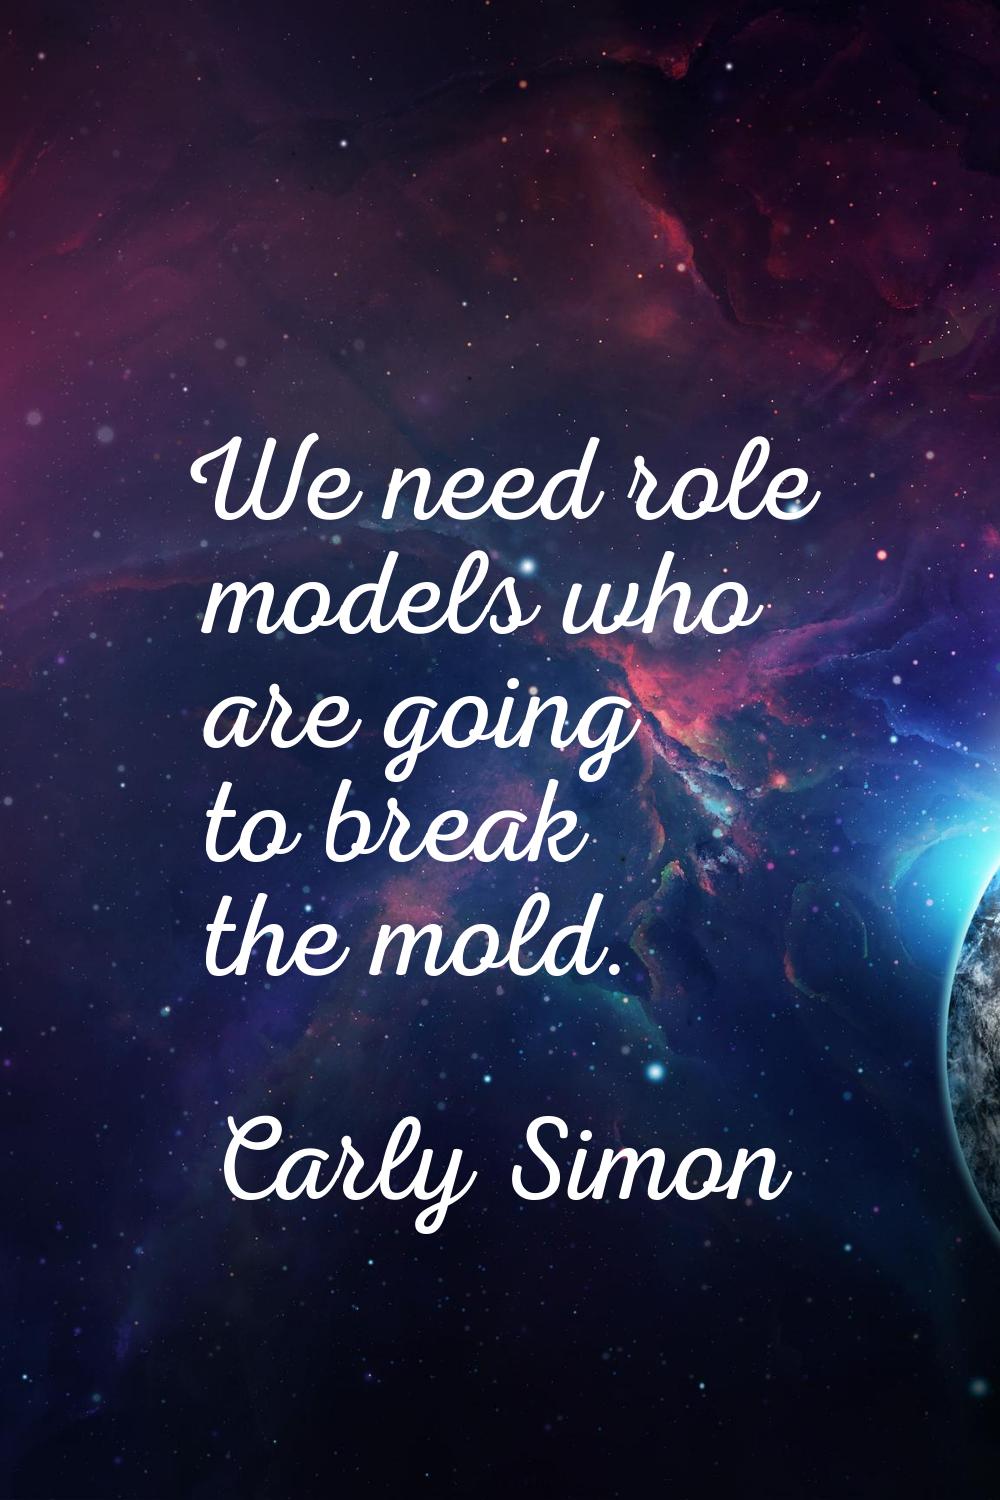 We need role models who are going to break the mold.